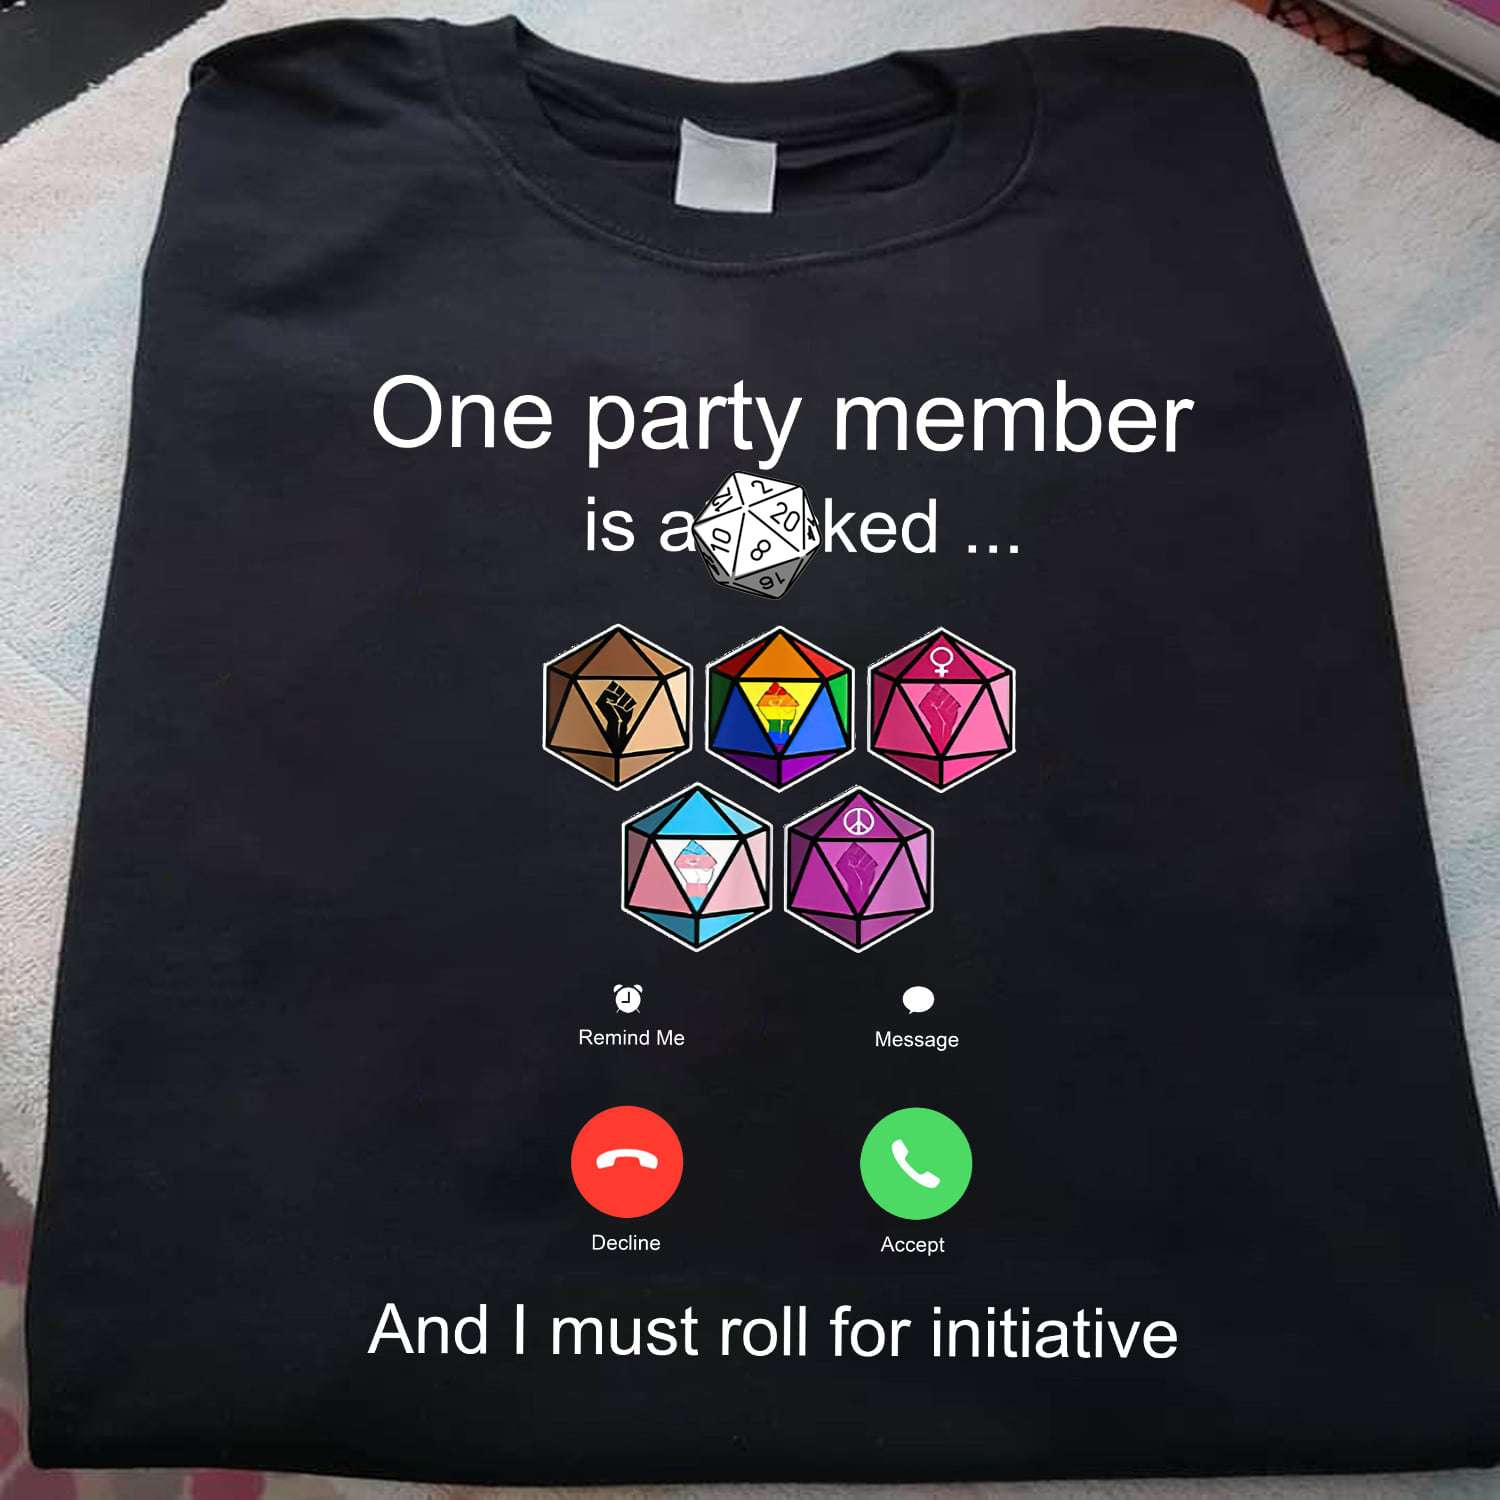 One party member is asked and I must roll for initiative - Rolling colorful dice, d&d game, lgbt community